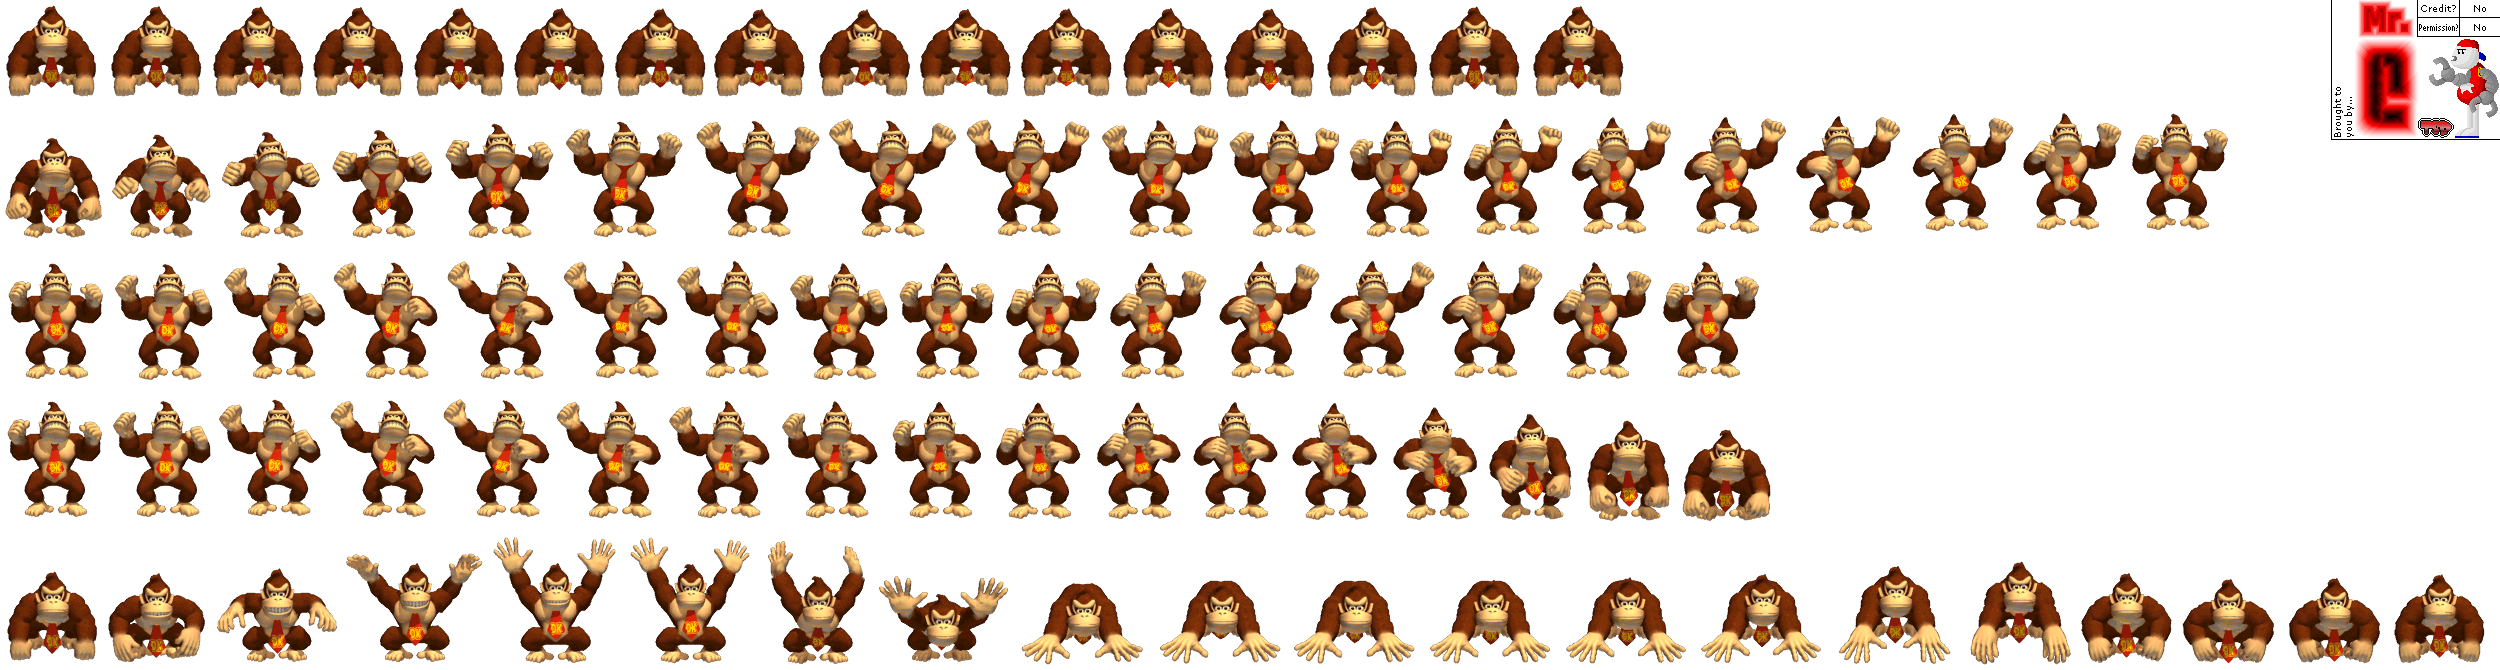 The Spriters Resource - Full Sheet View - Donkey Kong Country 2